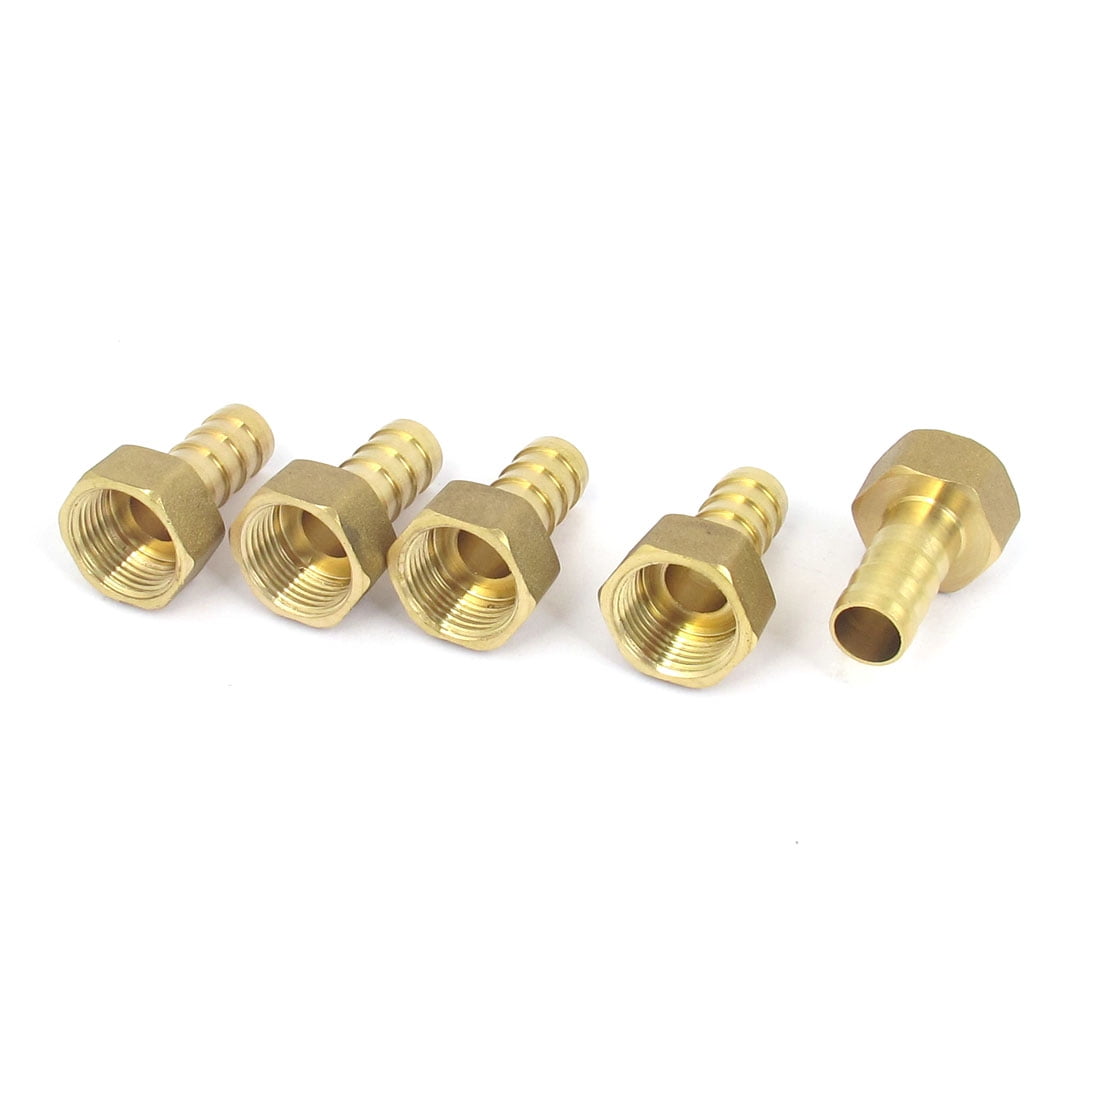 Brass Pneumatic Fitting Female Thread to Hose Barb Tube Quick Coupling 5Pcs/Set 